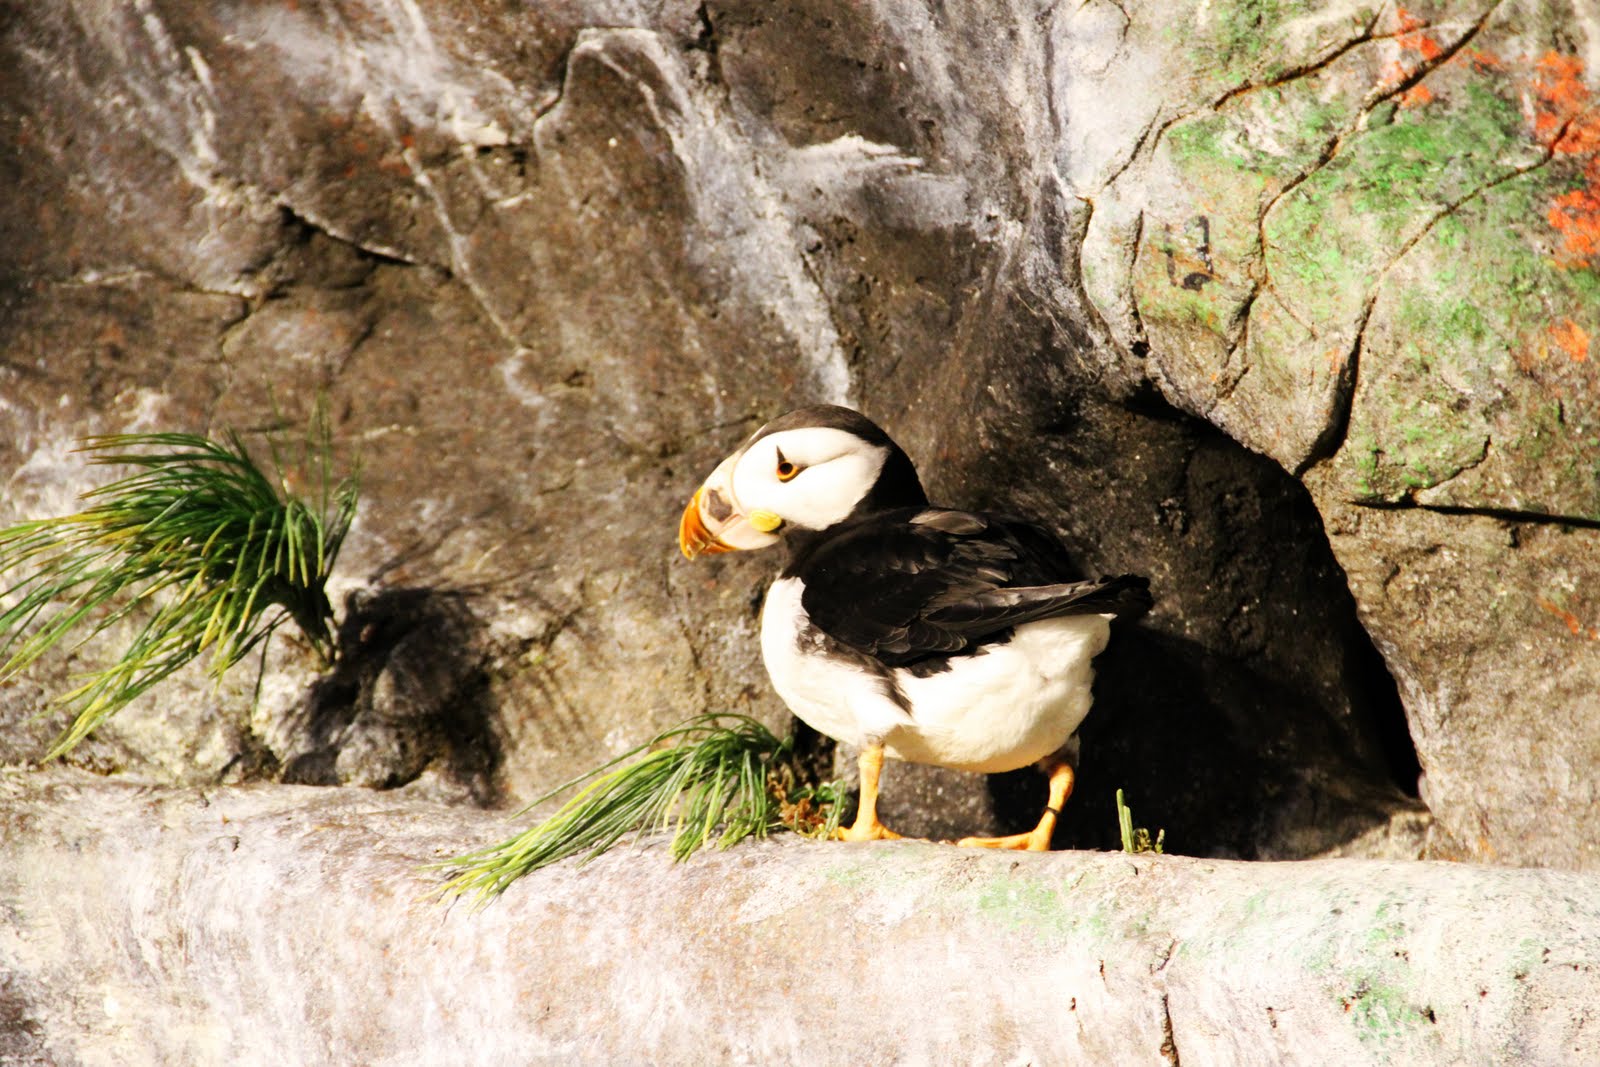 Horned Puffin  Saint Louis Zoo